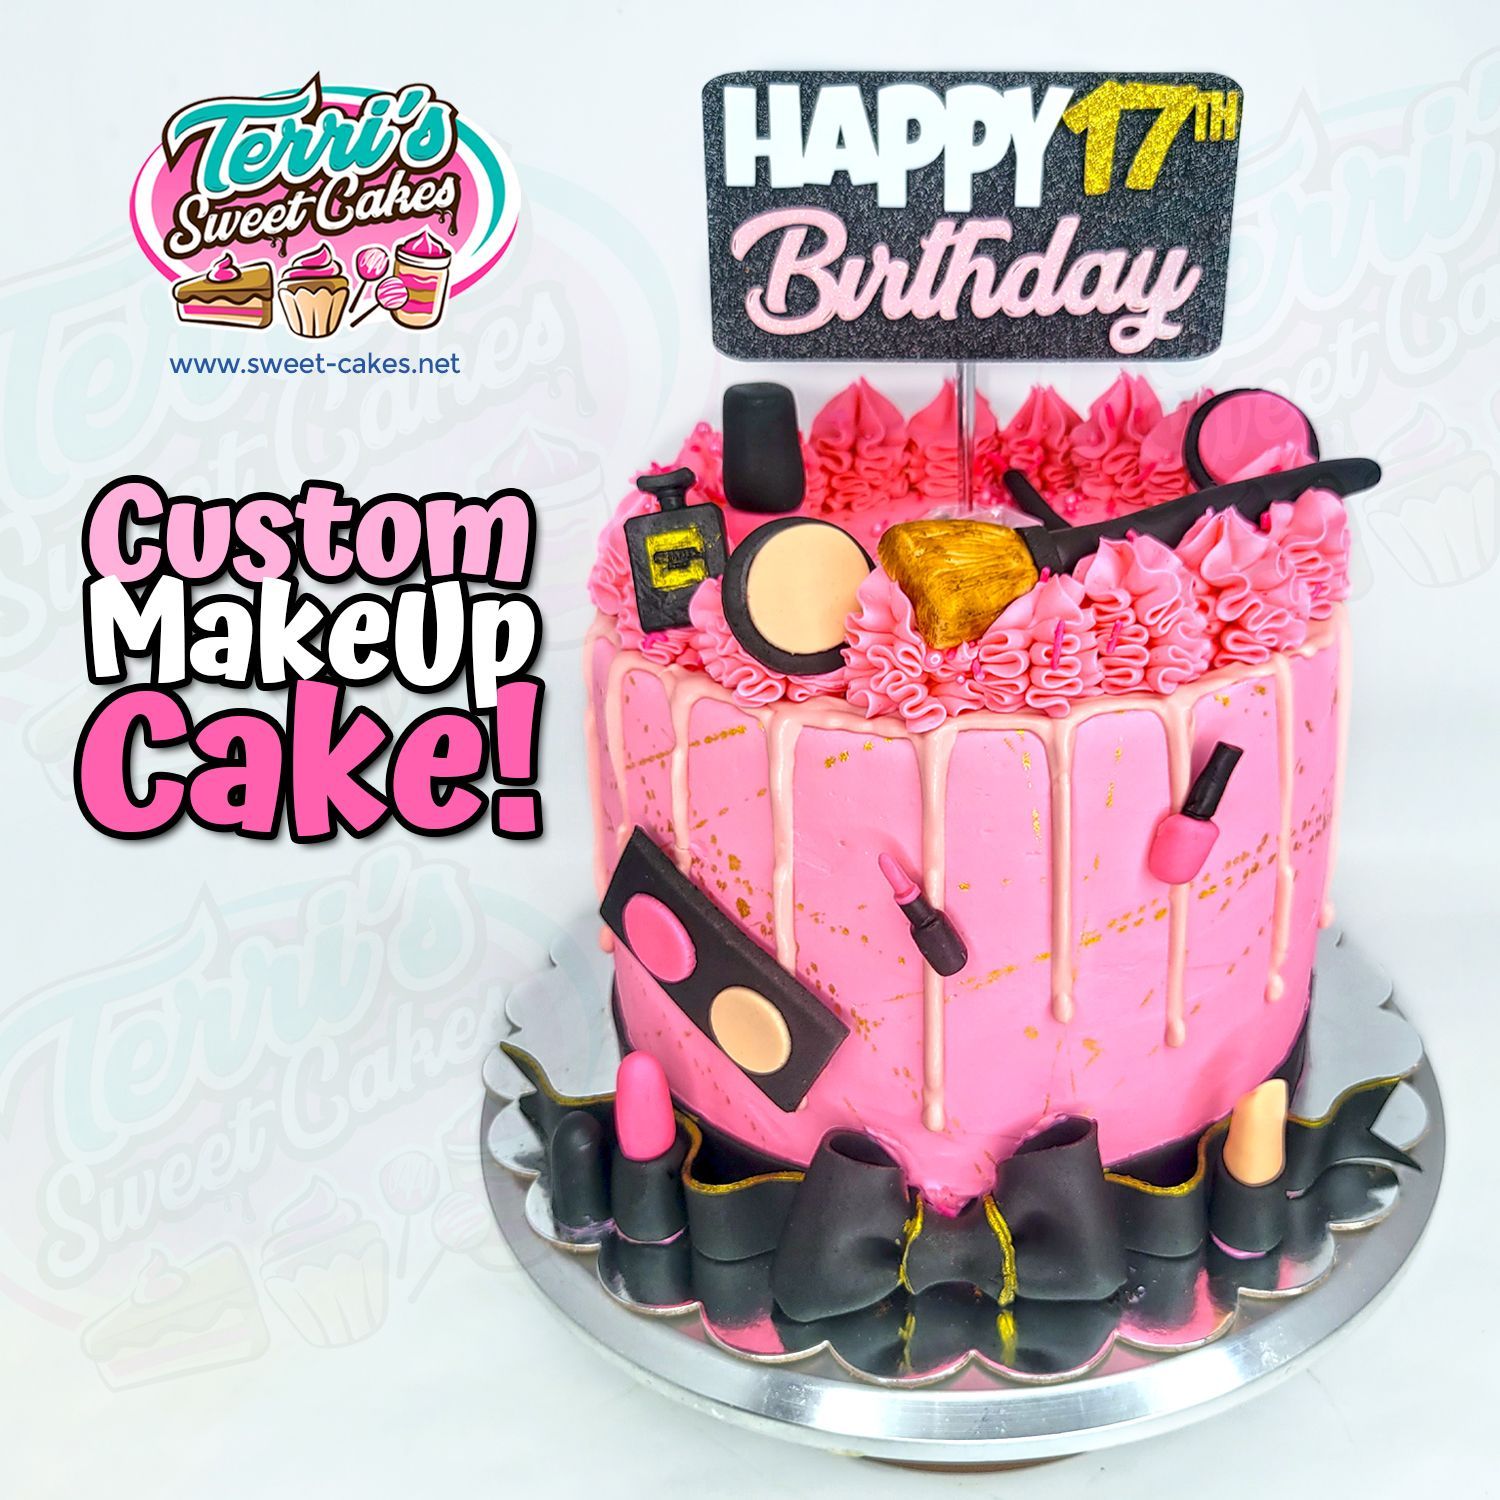 An exquisite Custom Makeup Birthday Cake by Terri's Sweet Cakes, featuring detailed decorations!